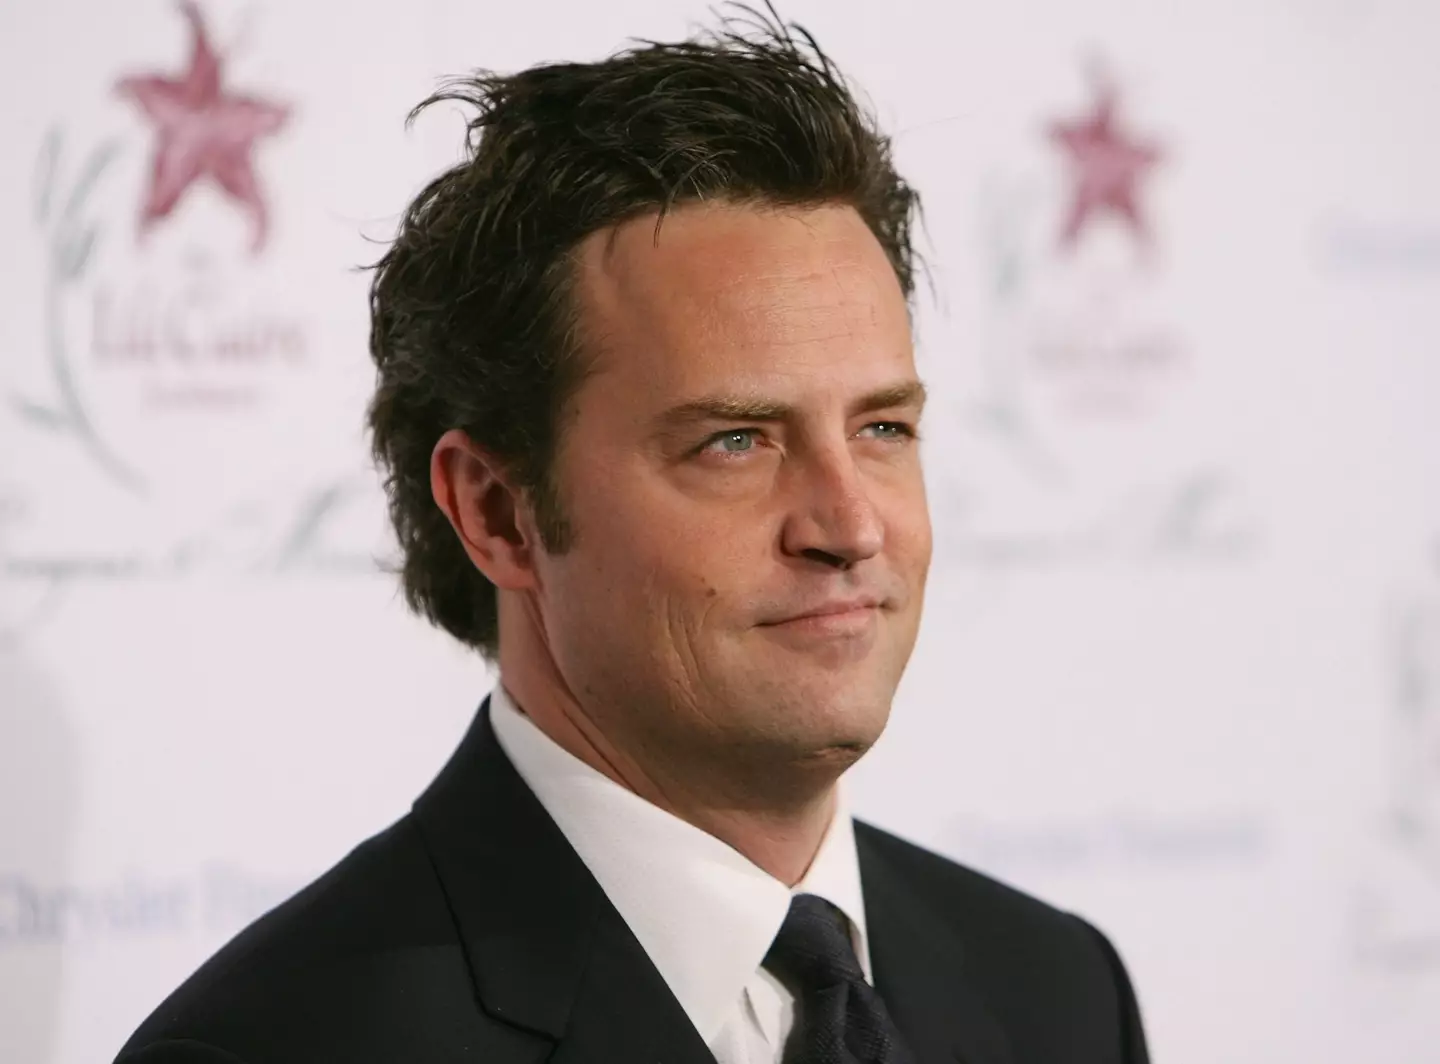 Matthew Perry was one of the famous faces we lost this year.